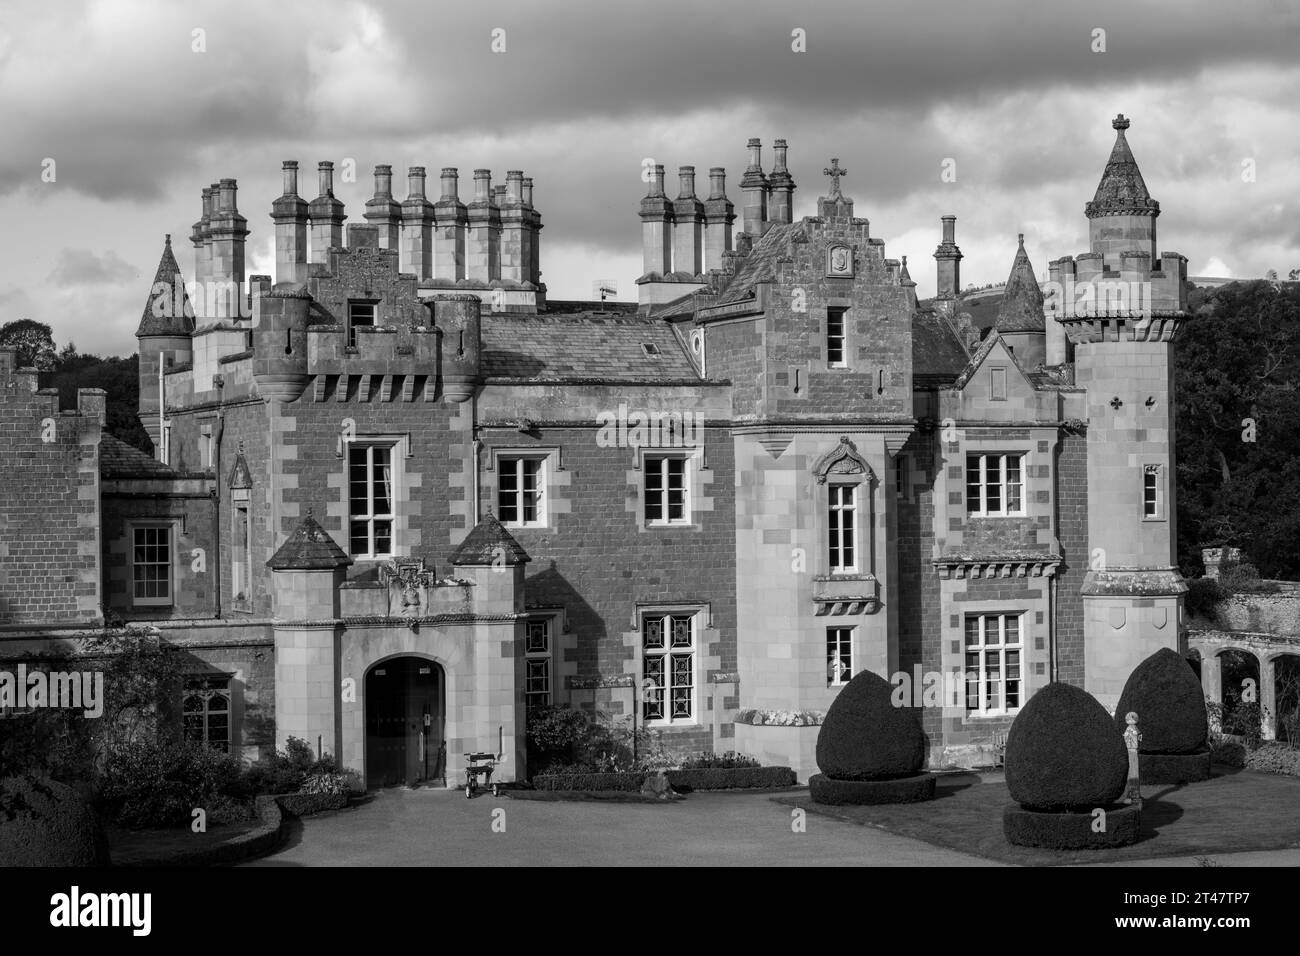 Abbotsford House, Abbotsford, Melrose, Roxburghshire, Scotland, UK - home of Sir Walter Scott - exterior view of the house and grounds. Stock Photo